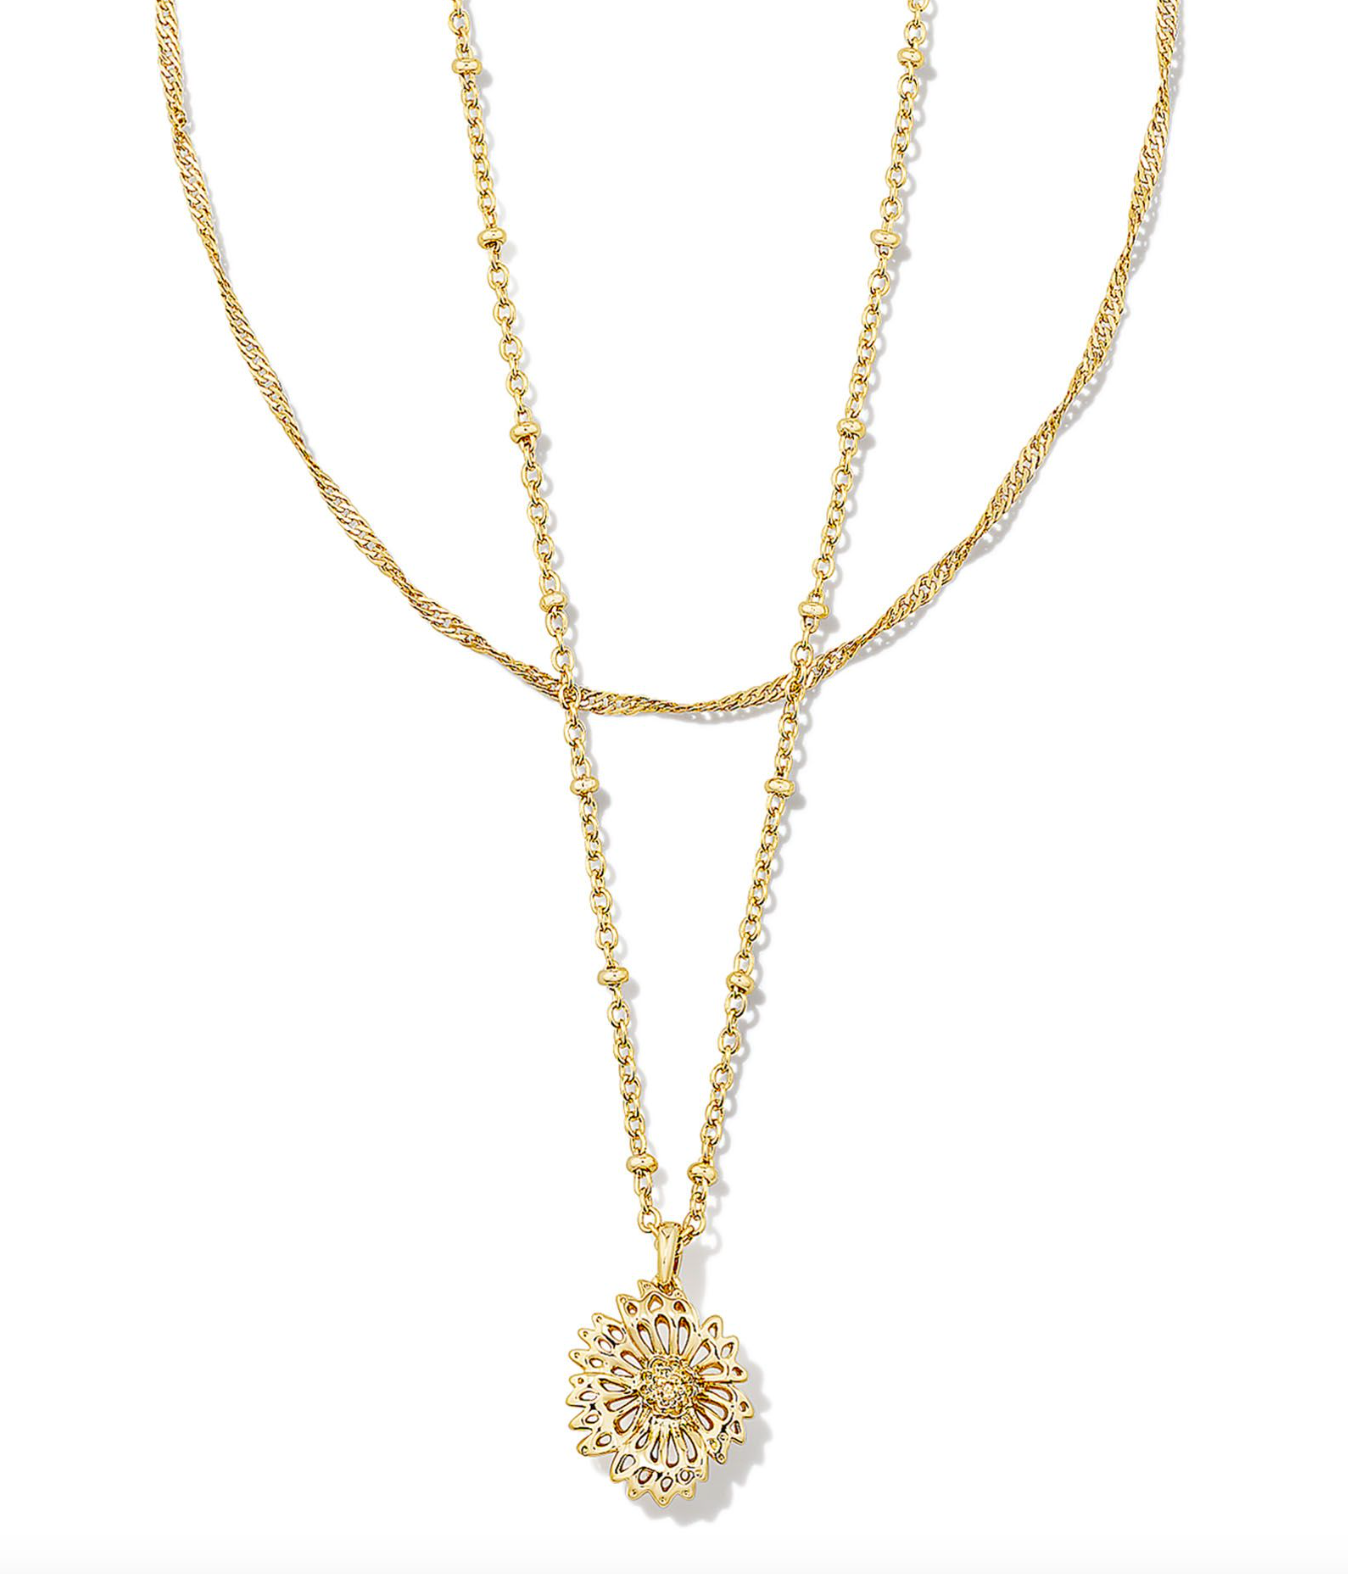 Brielle Multi Strand Necklace in Gold | KENDRA SCOTT - The Street Boutique 